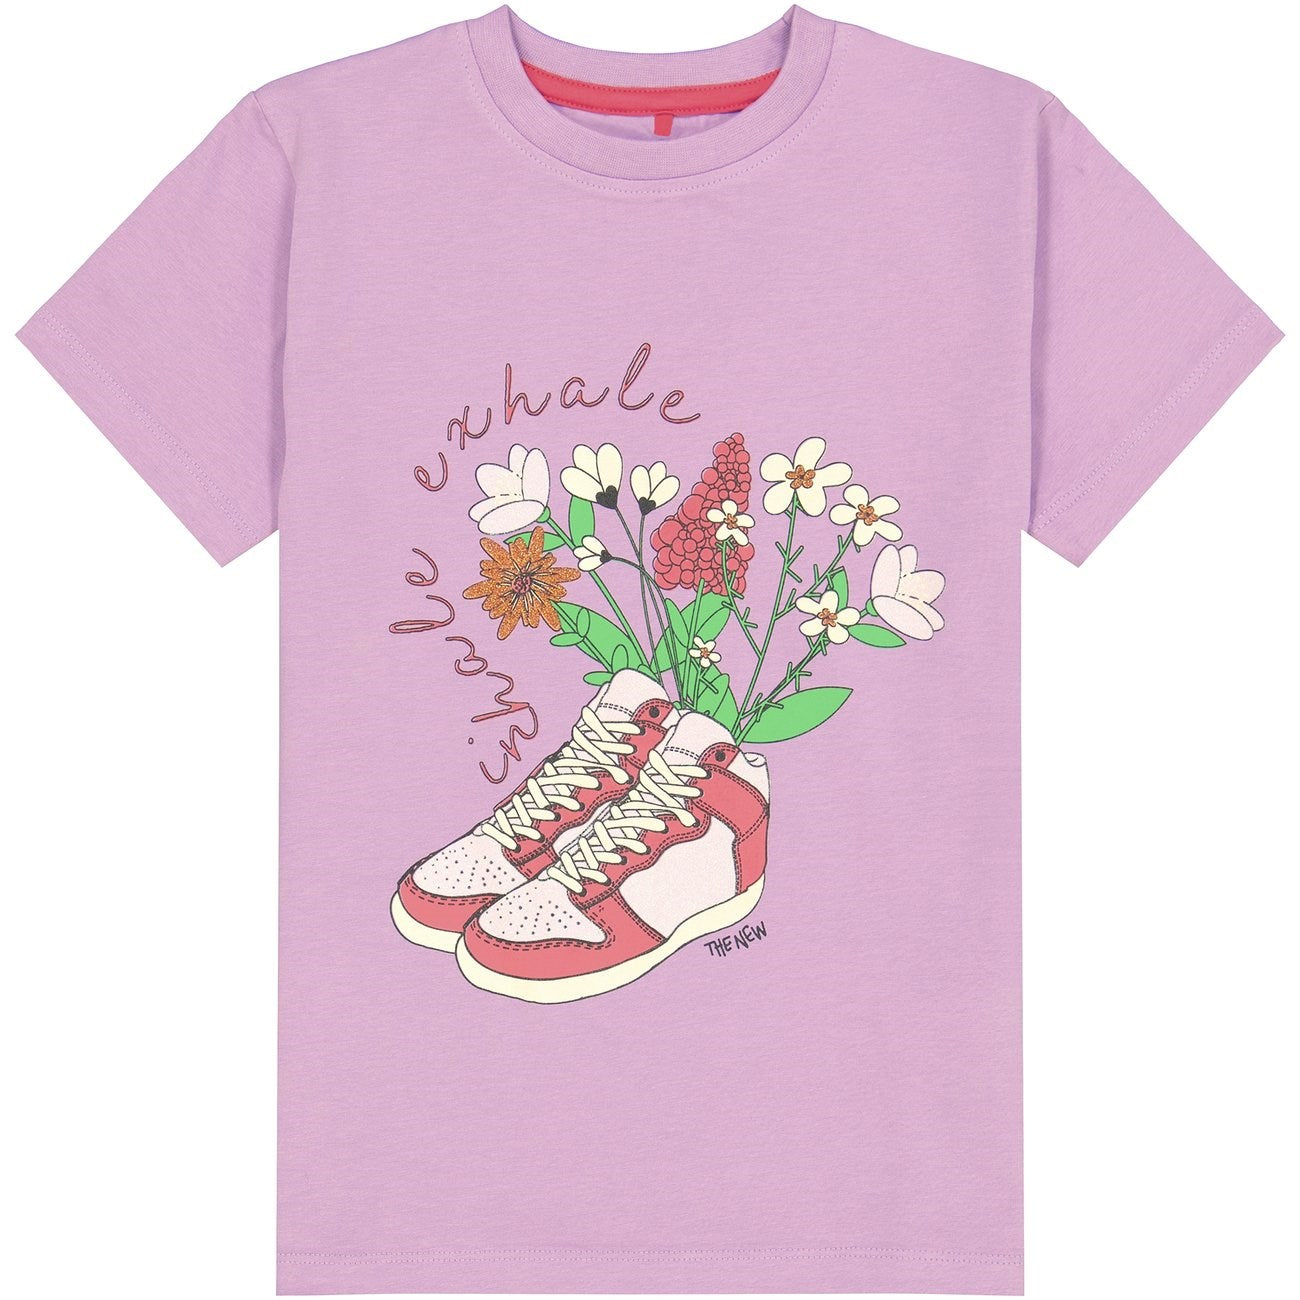 The New Lavender Herb Jessica T-Shirt